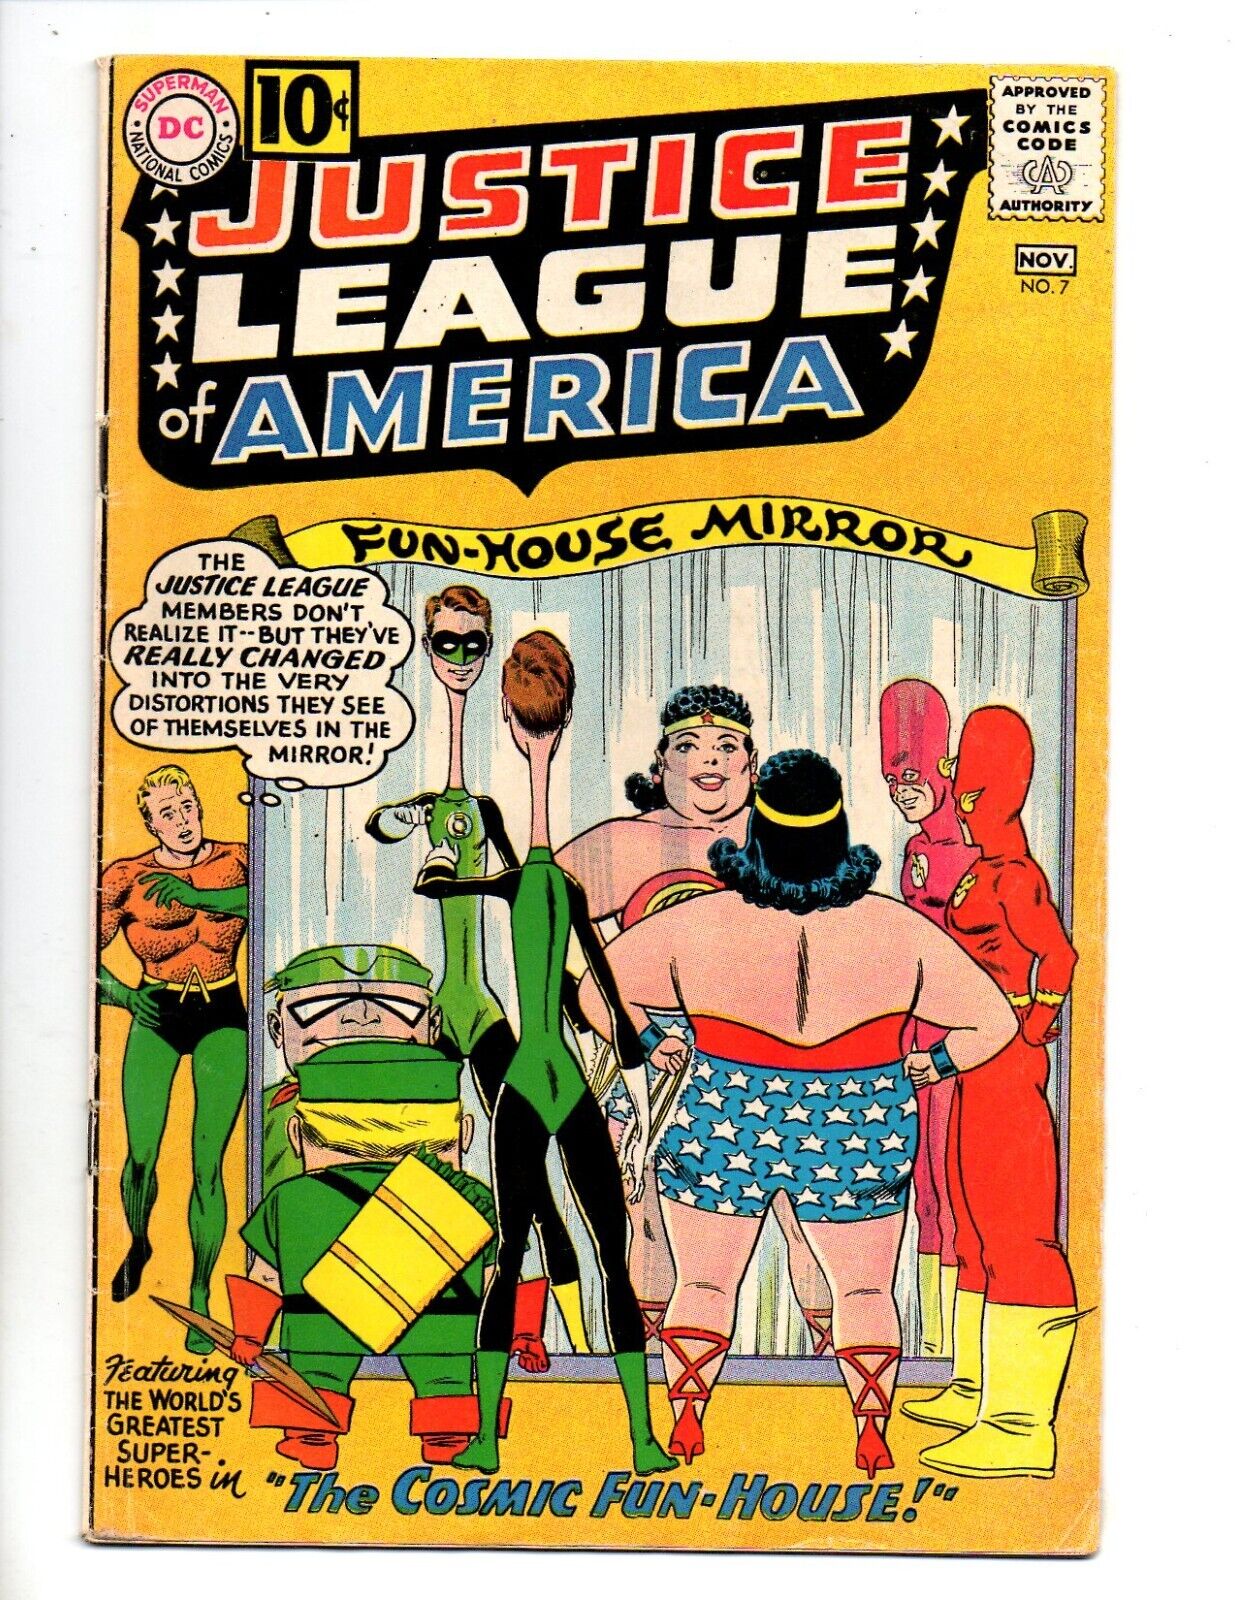 JUSTICE LEAGUE OF AMERICA #7  VG+ 4.5  \